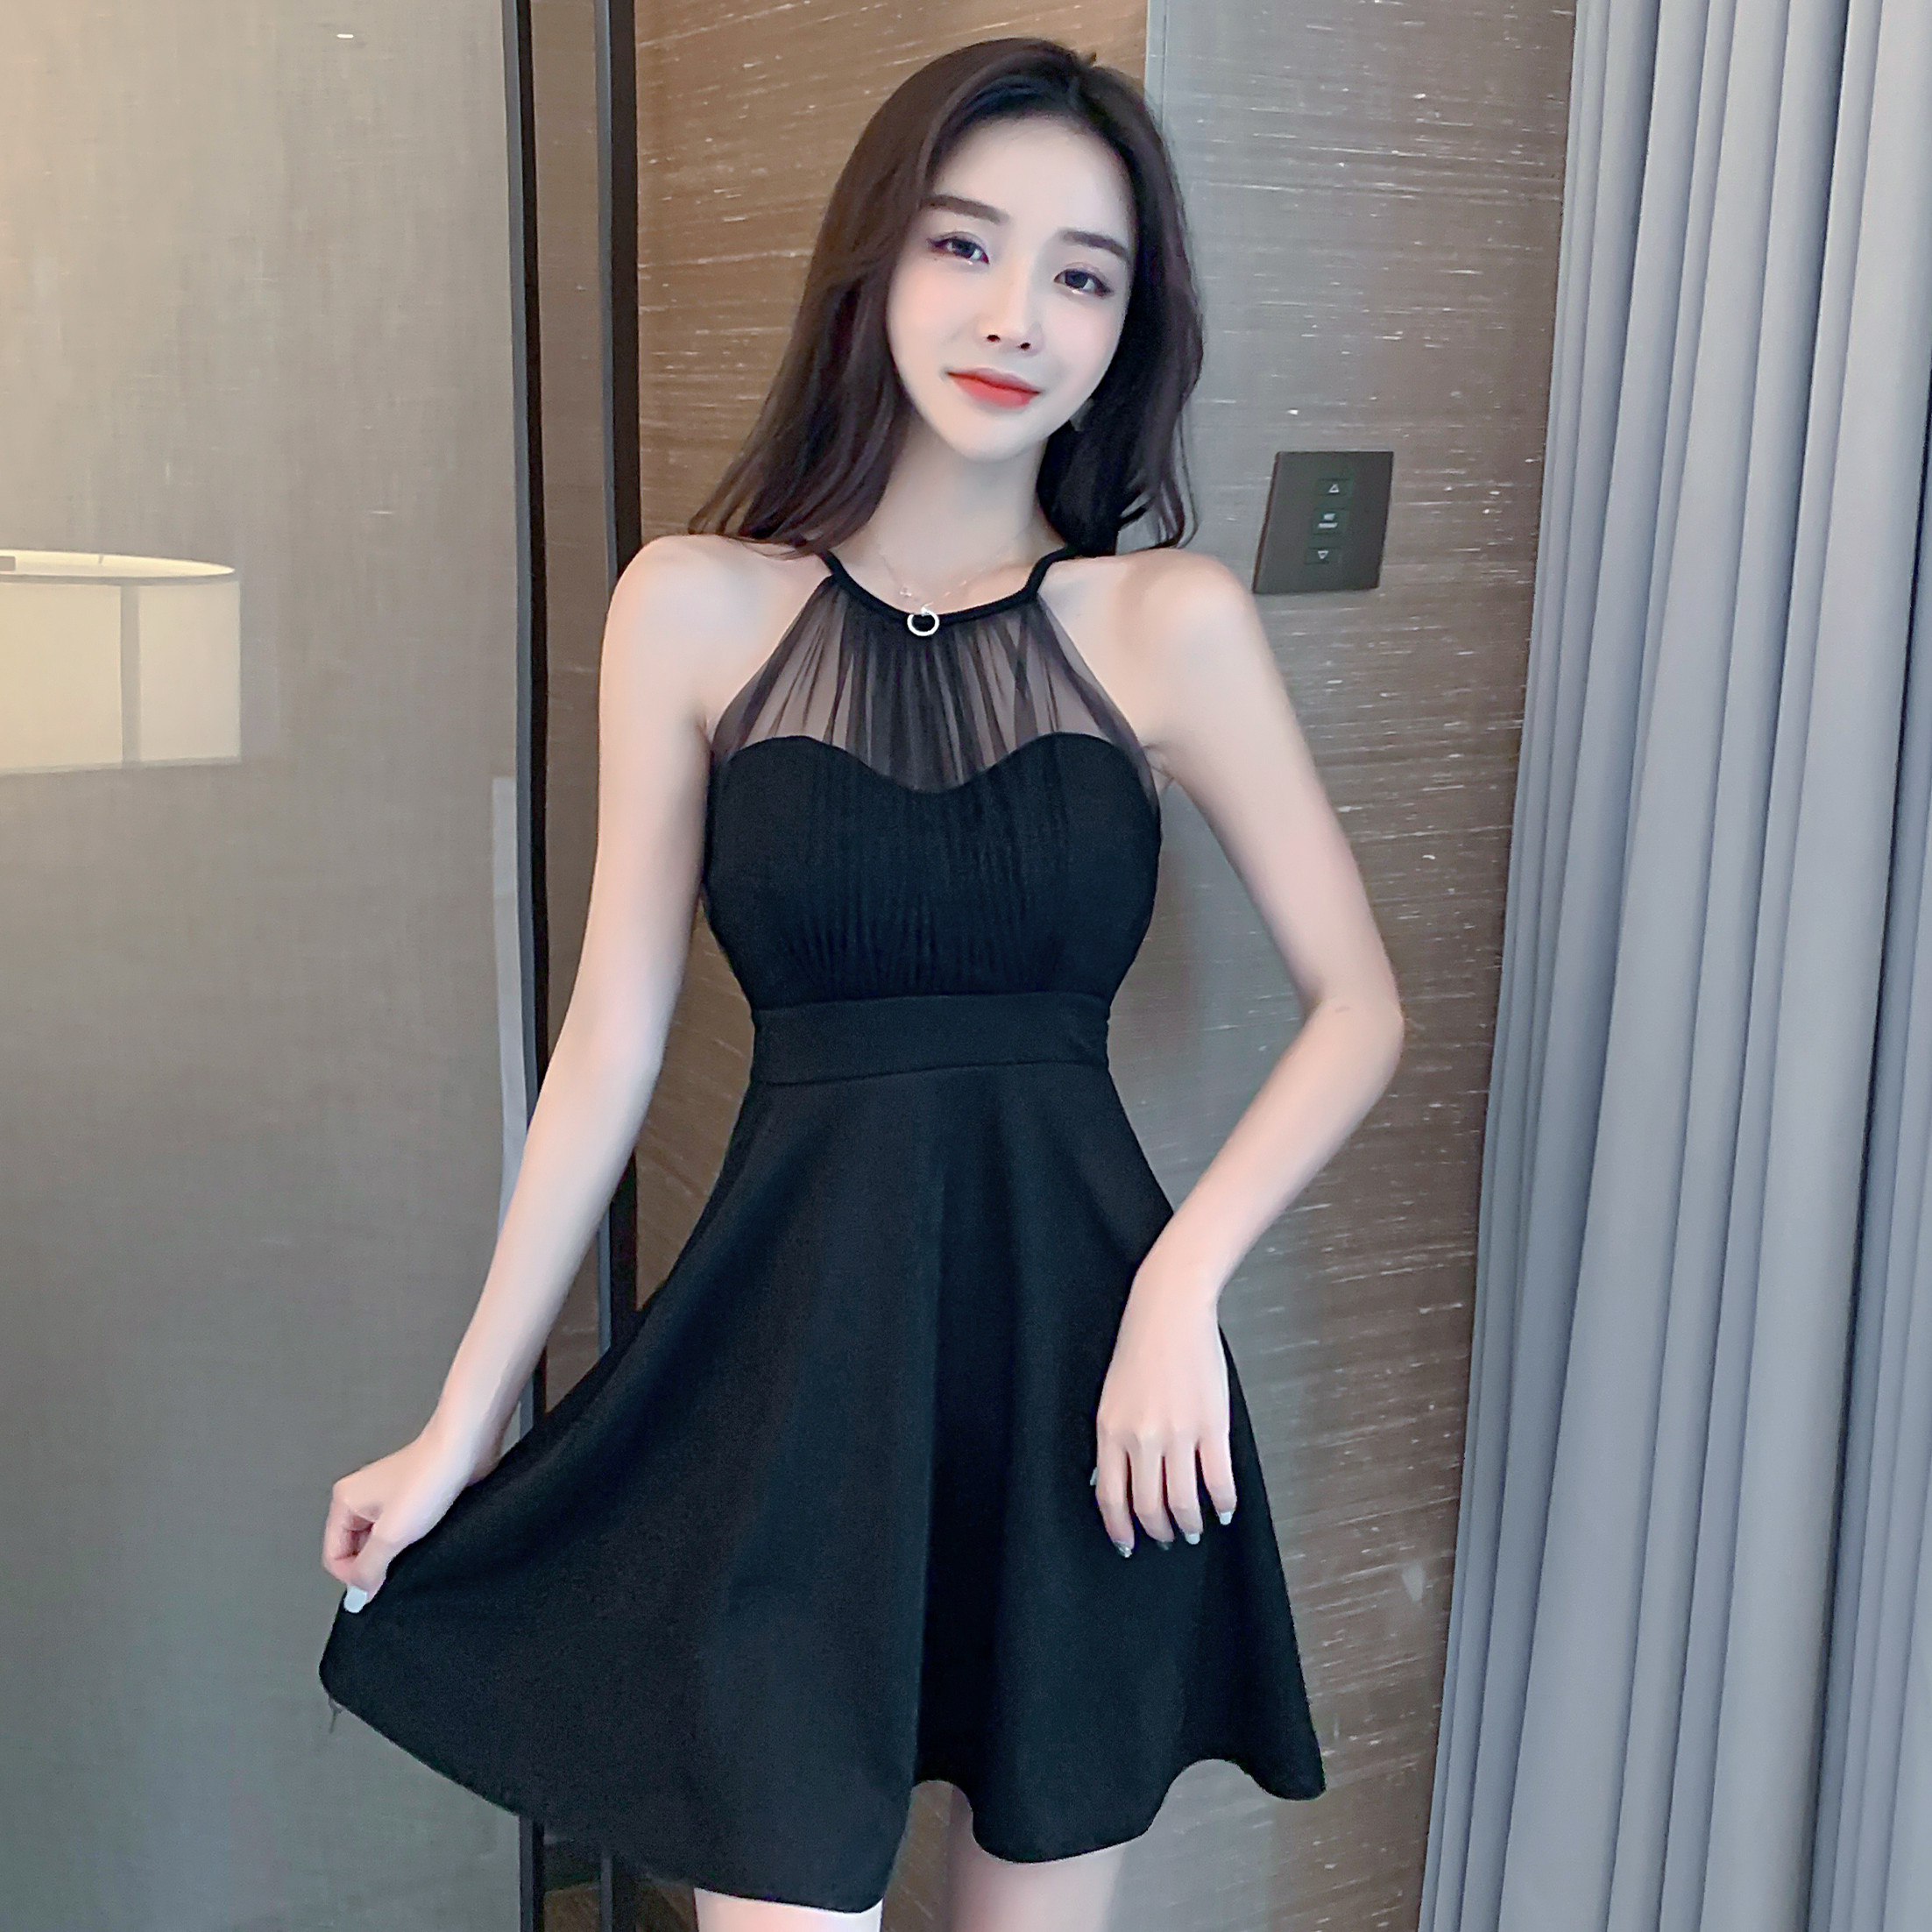 Real shooting new women's clothing sexy fashion air hollowed out cover belly hang neck short skirt nightclub dress